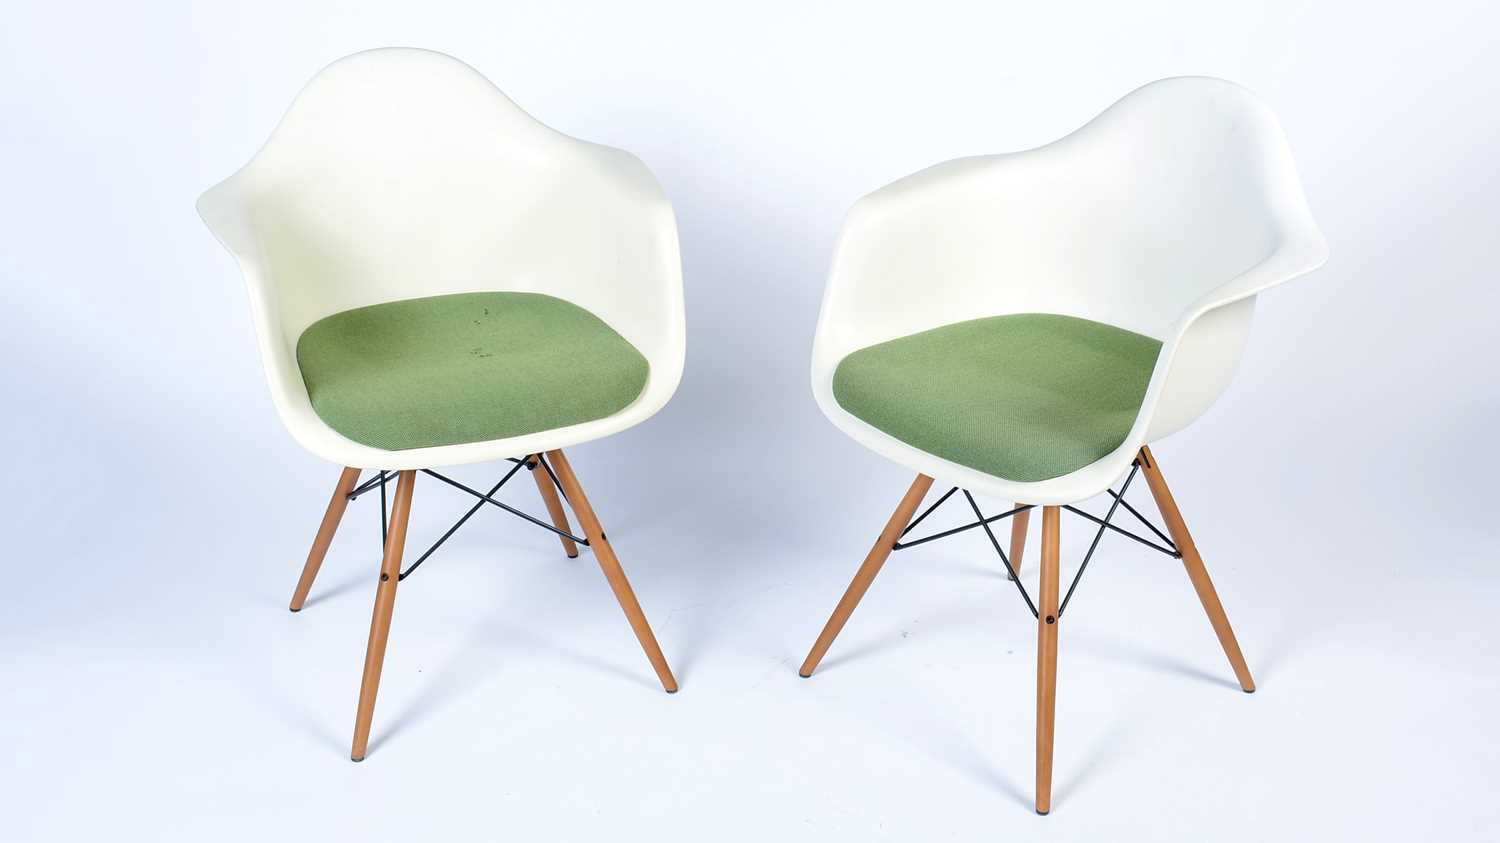 Vitra after a design by Charles and Ray Eames: a pair of white plastic chairs.